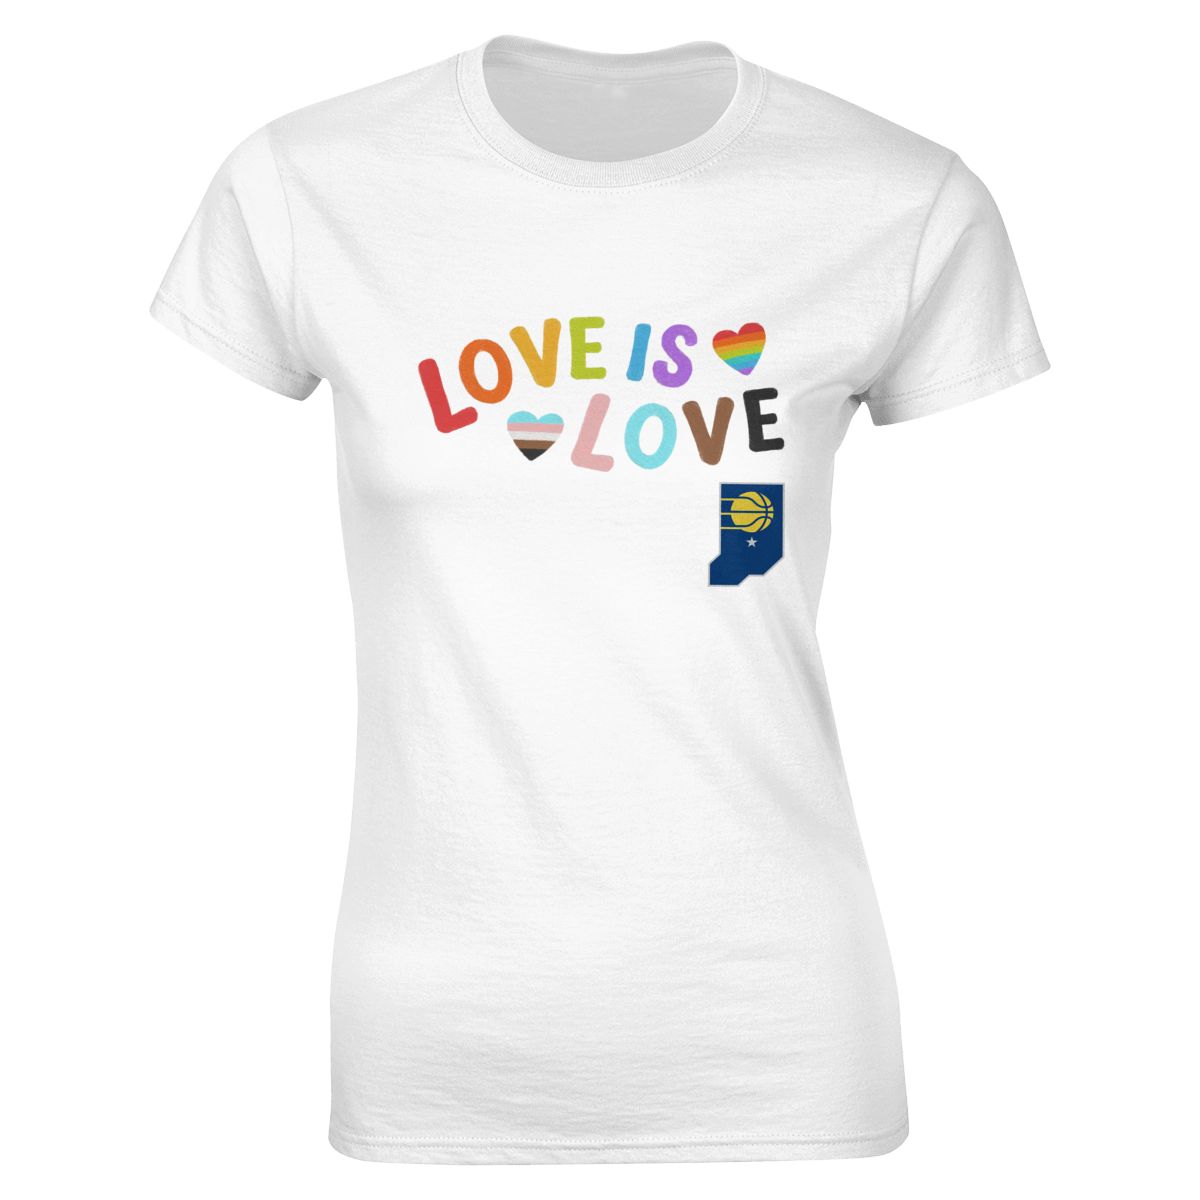 Indiana Pacers Love Pride Women's Soft Cotton T-Shirt